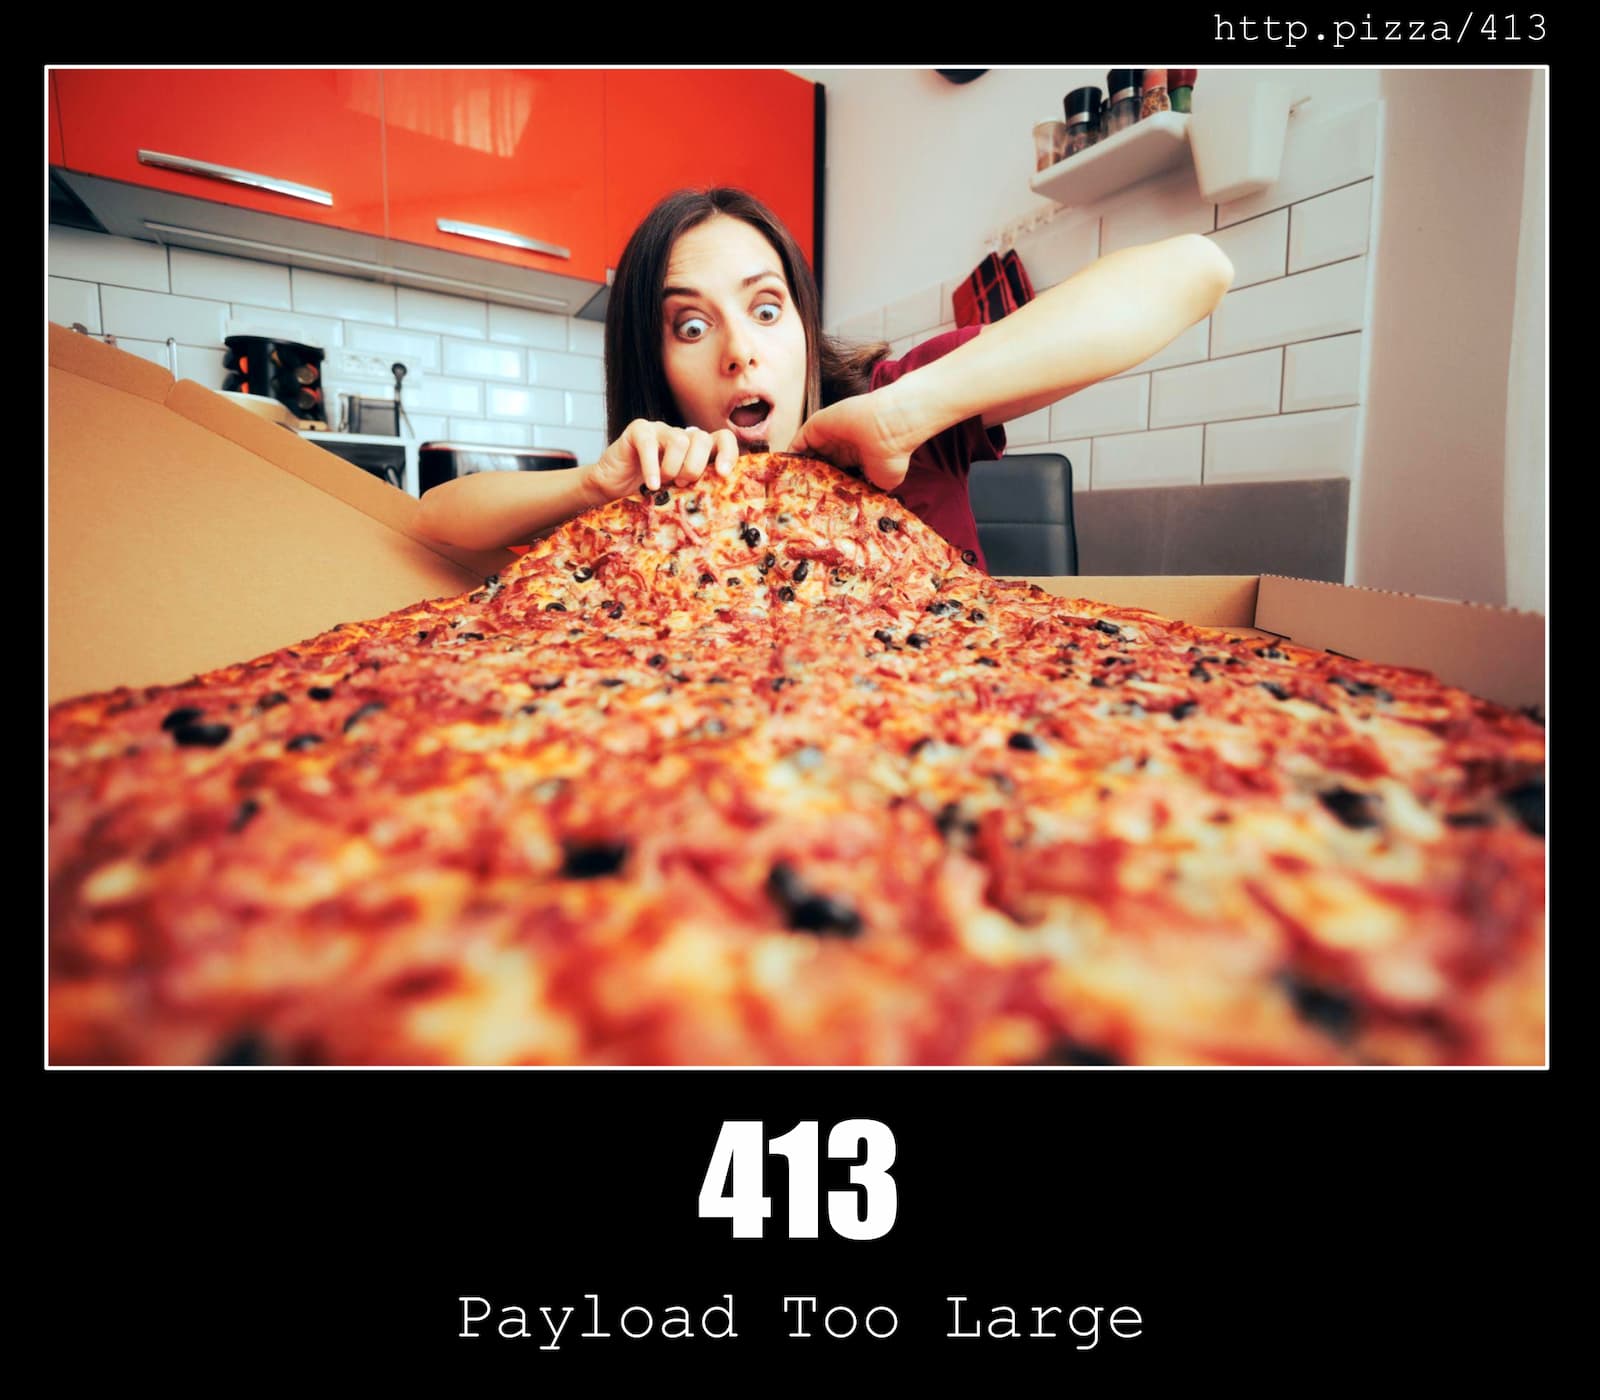 HTTP Status Code 413 Payload Too Large & Pizzas